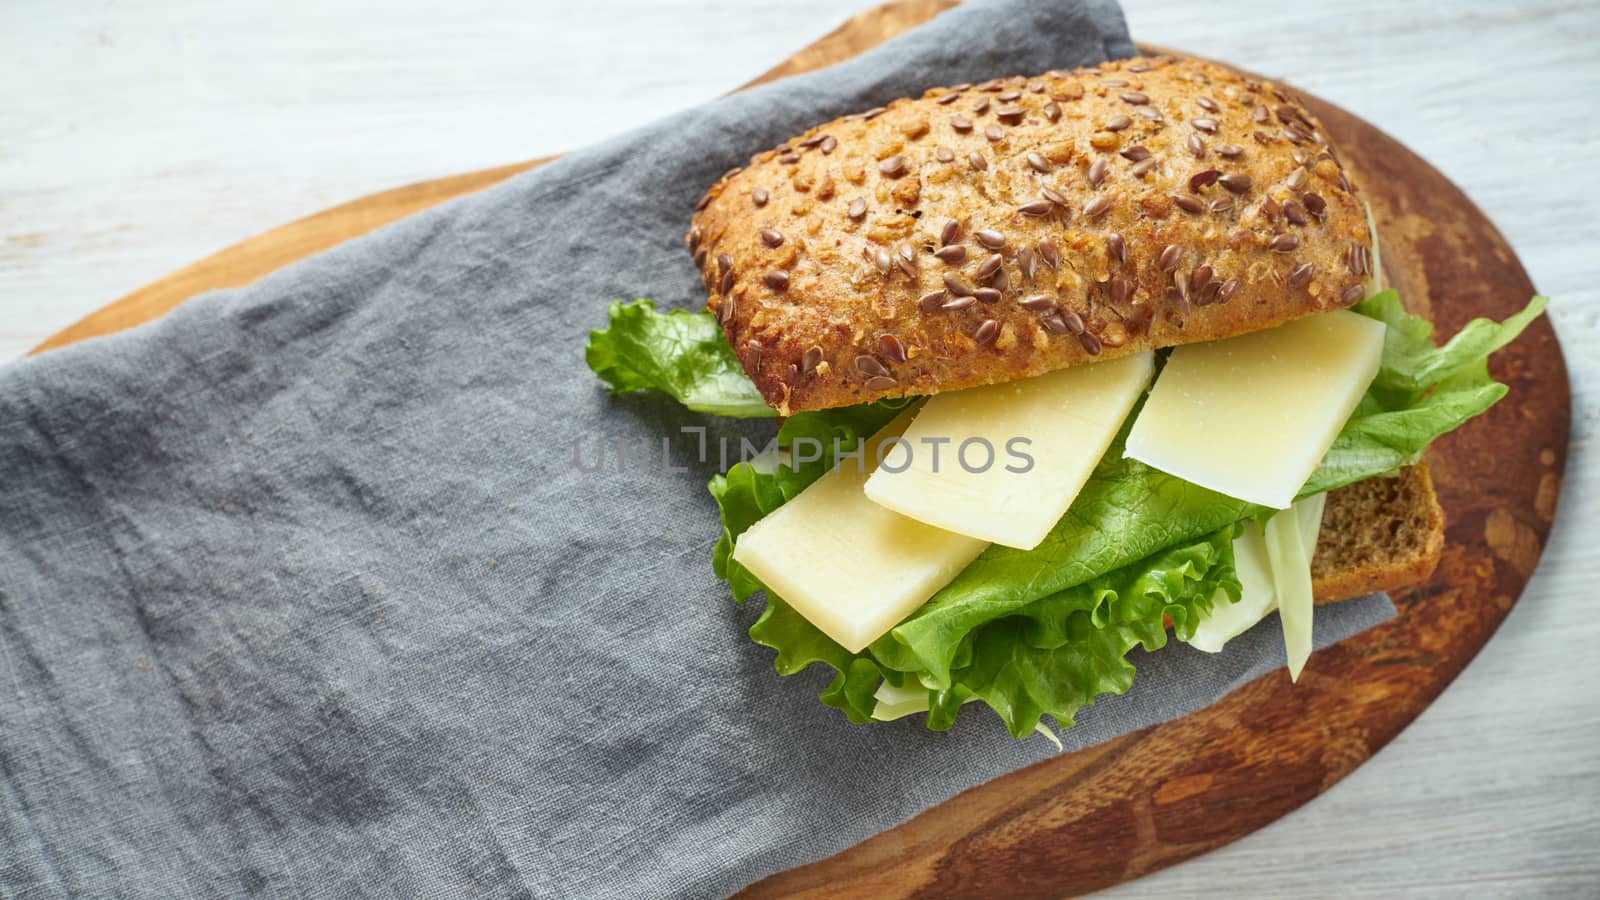 Vegetable sandwich on the wooden board top view